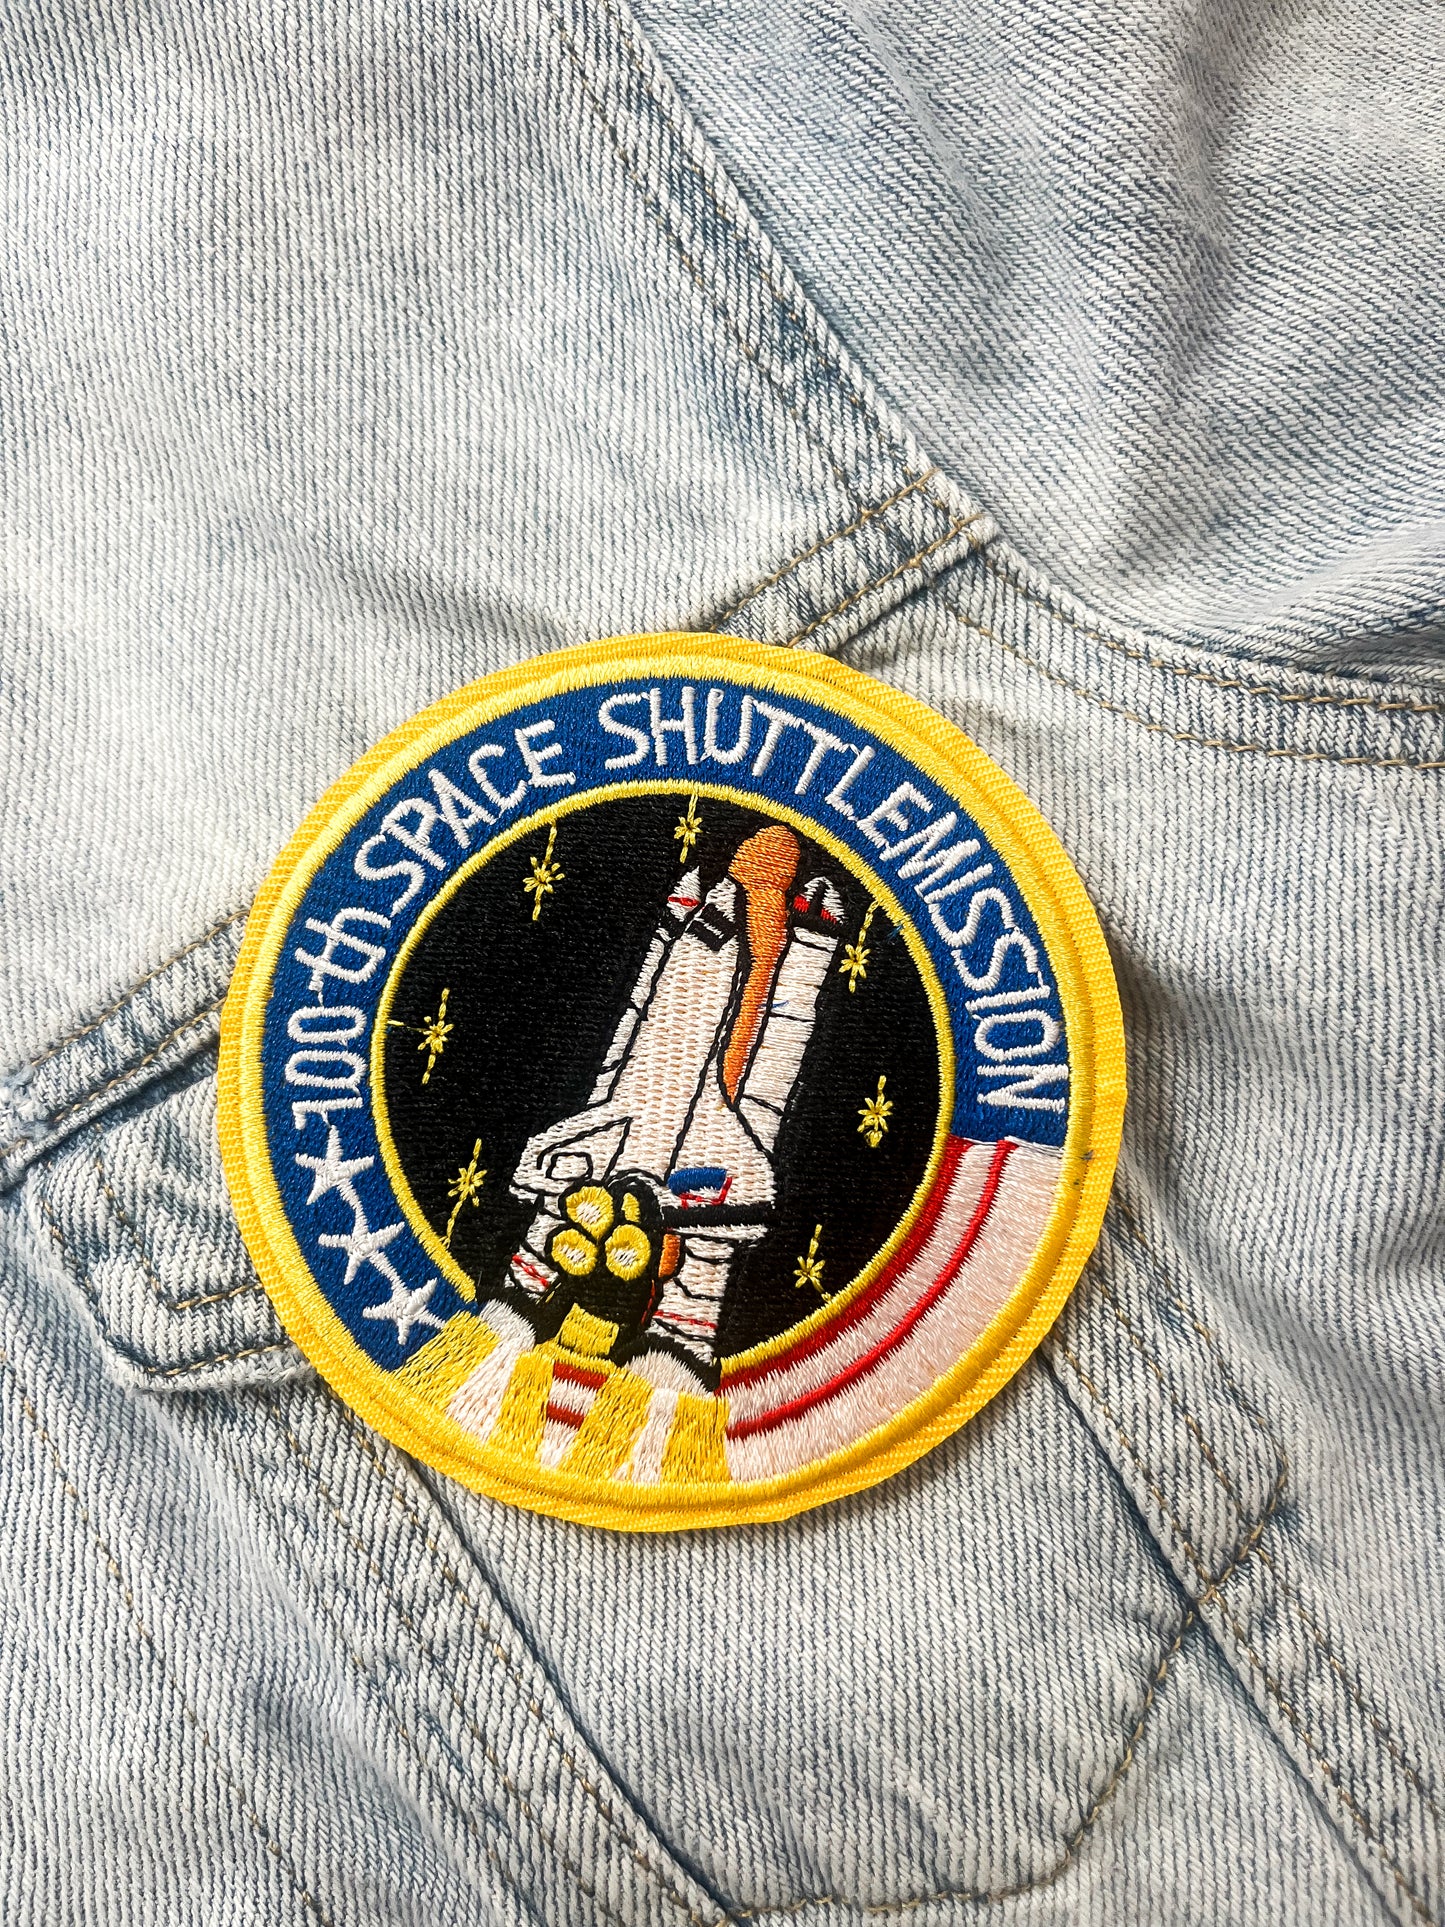 Space Shuttle Mission patch